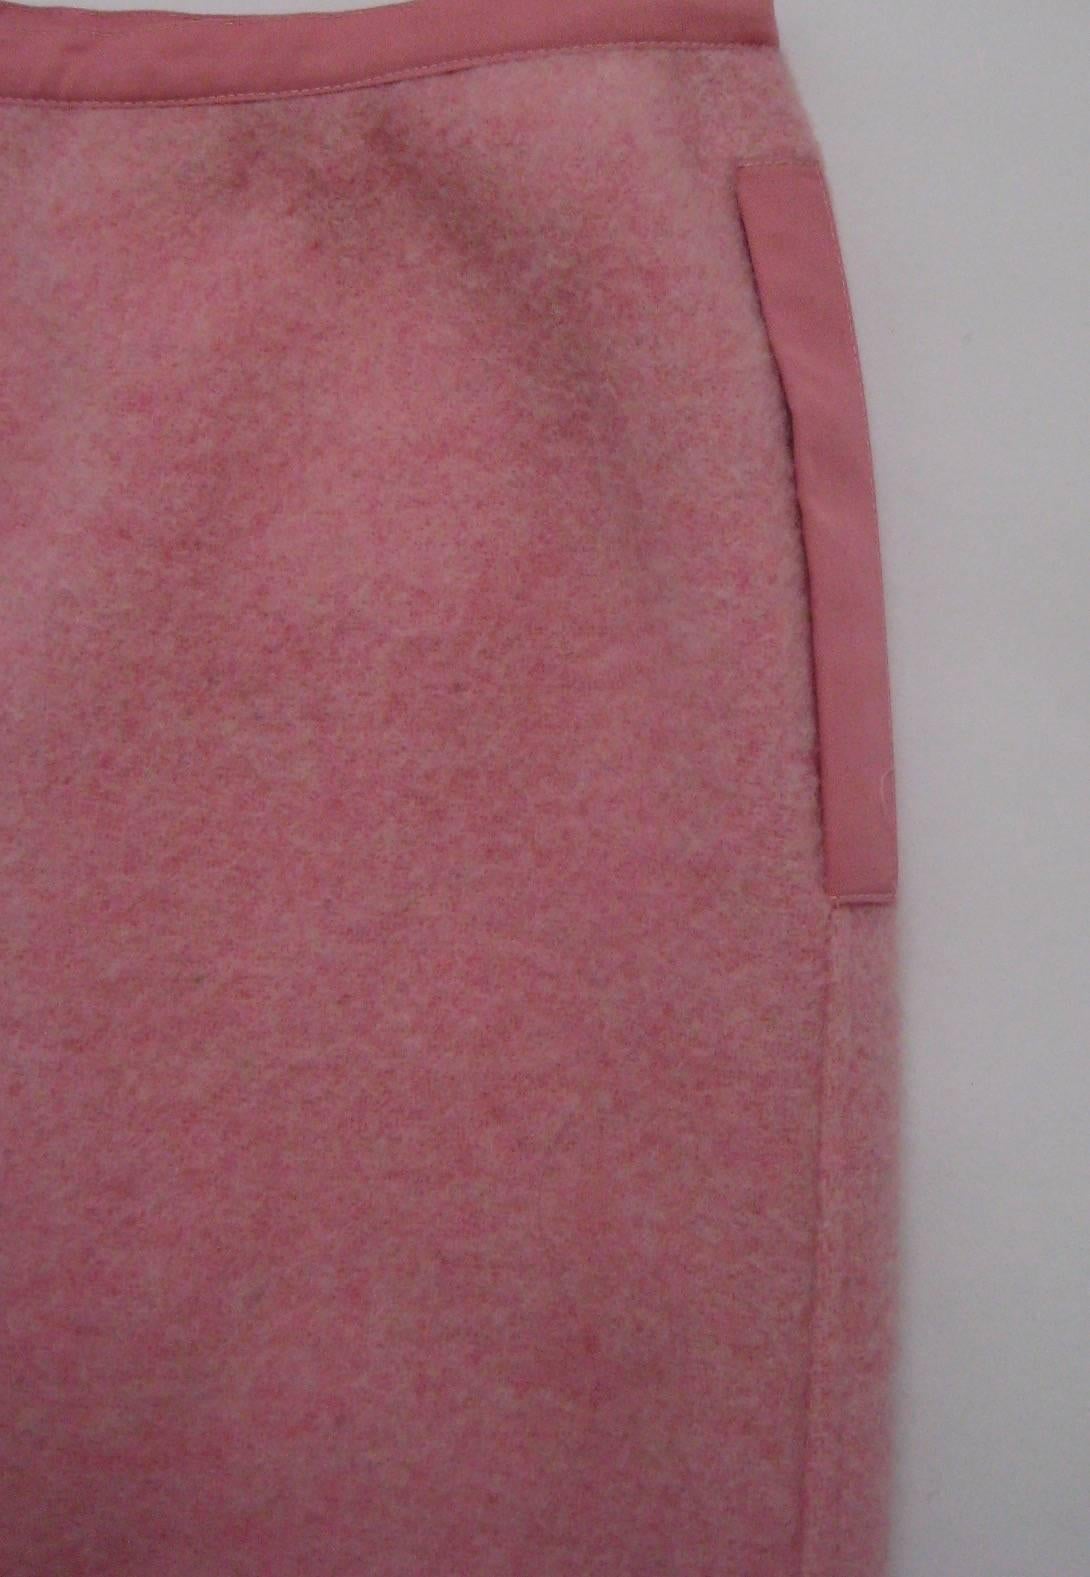 Lovely Courreges skirt in a wool knit with just a touch of mohair 
Fully lined 
Side front zip hidden under ribbon detail
2 side pockets
Near mint condition, this looks unworn